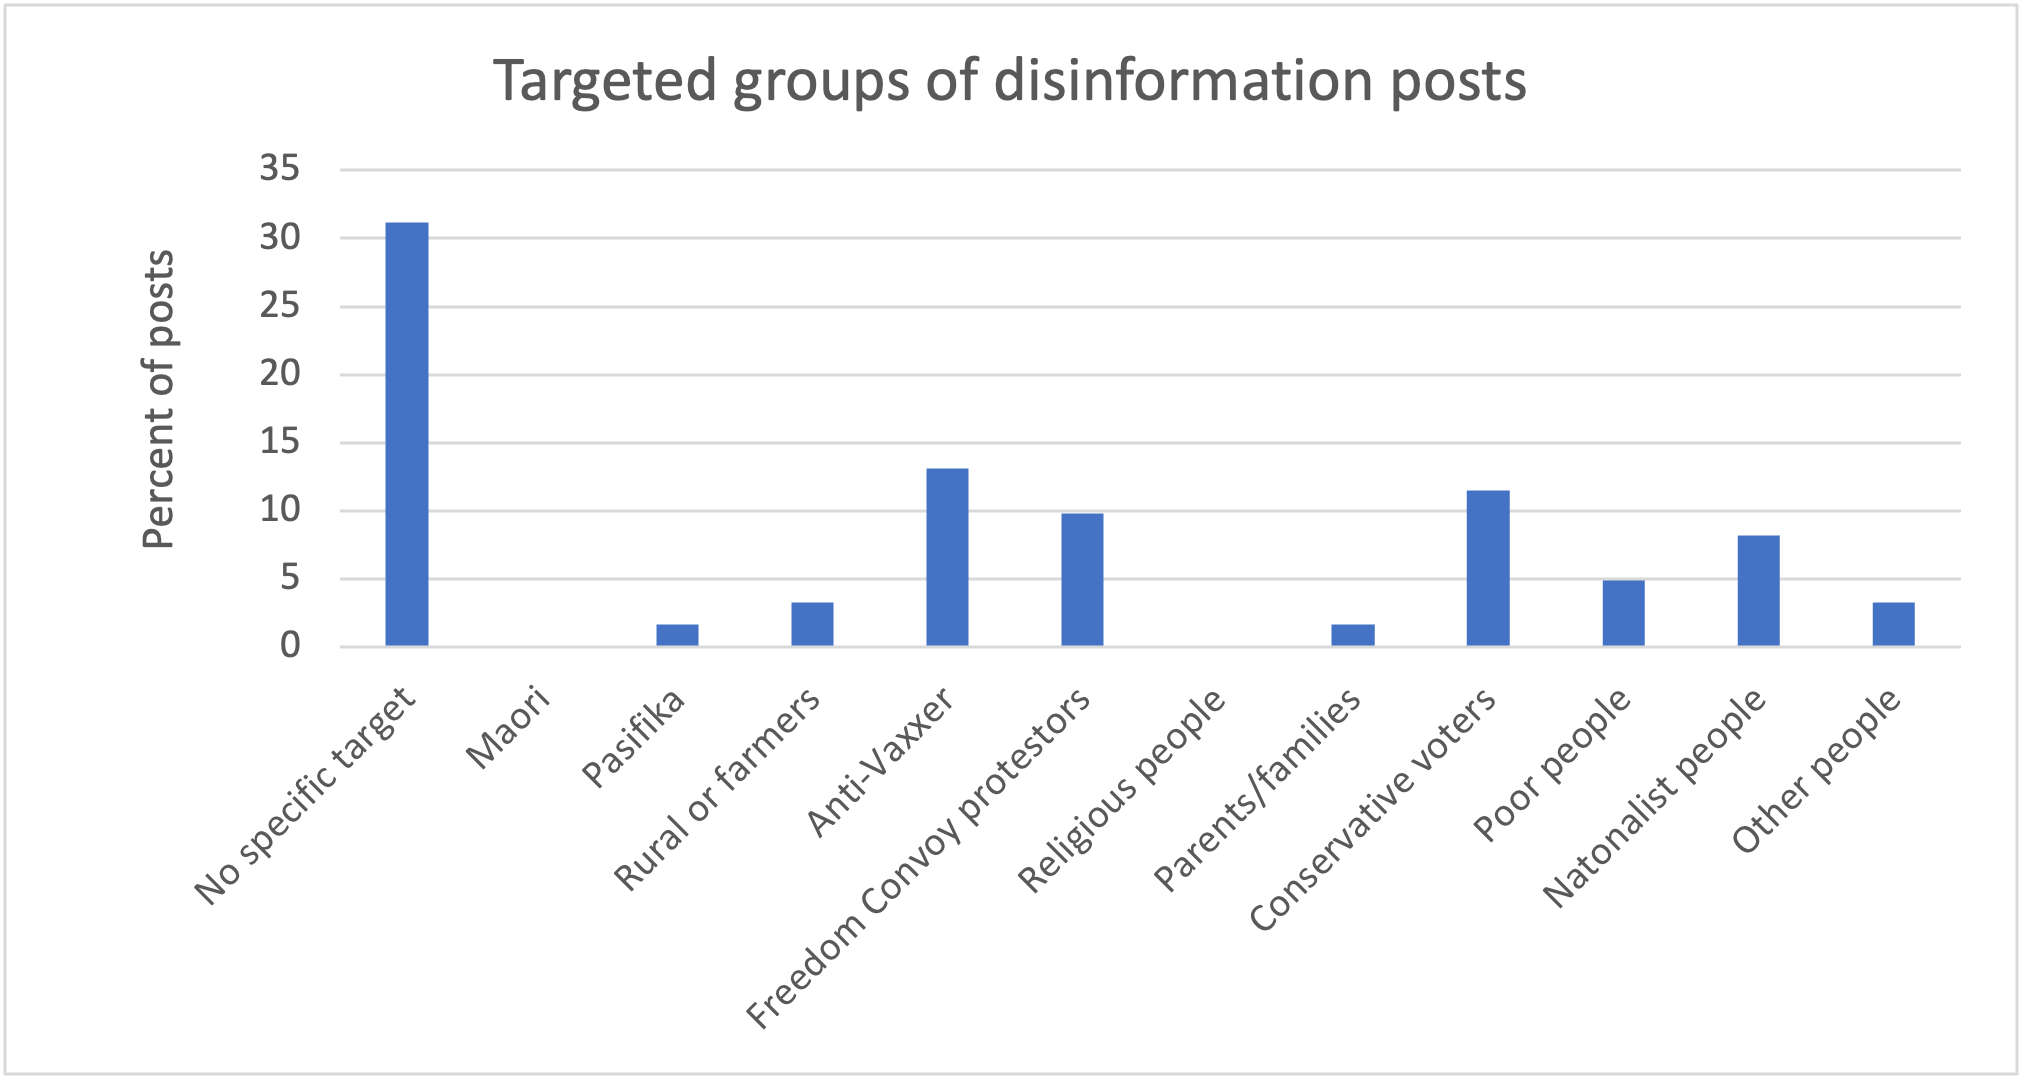 Targeted groups of disinformation posts